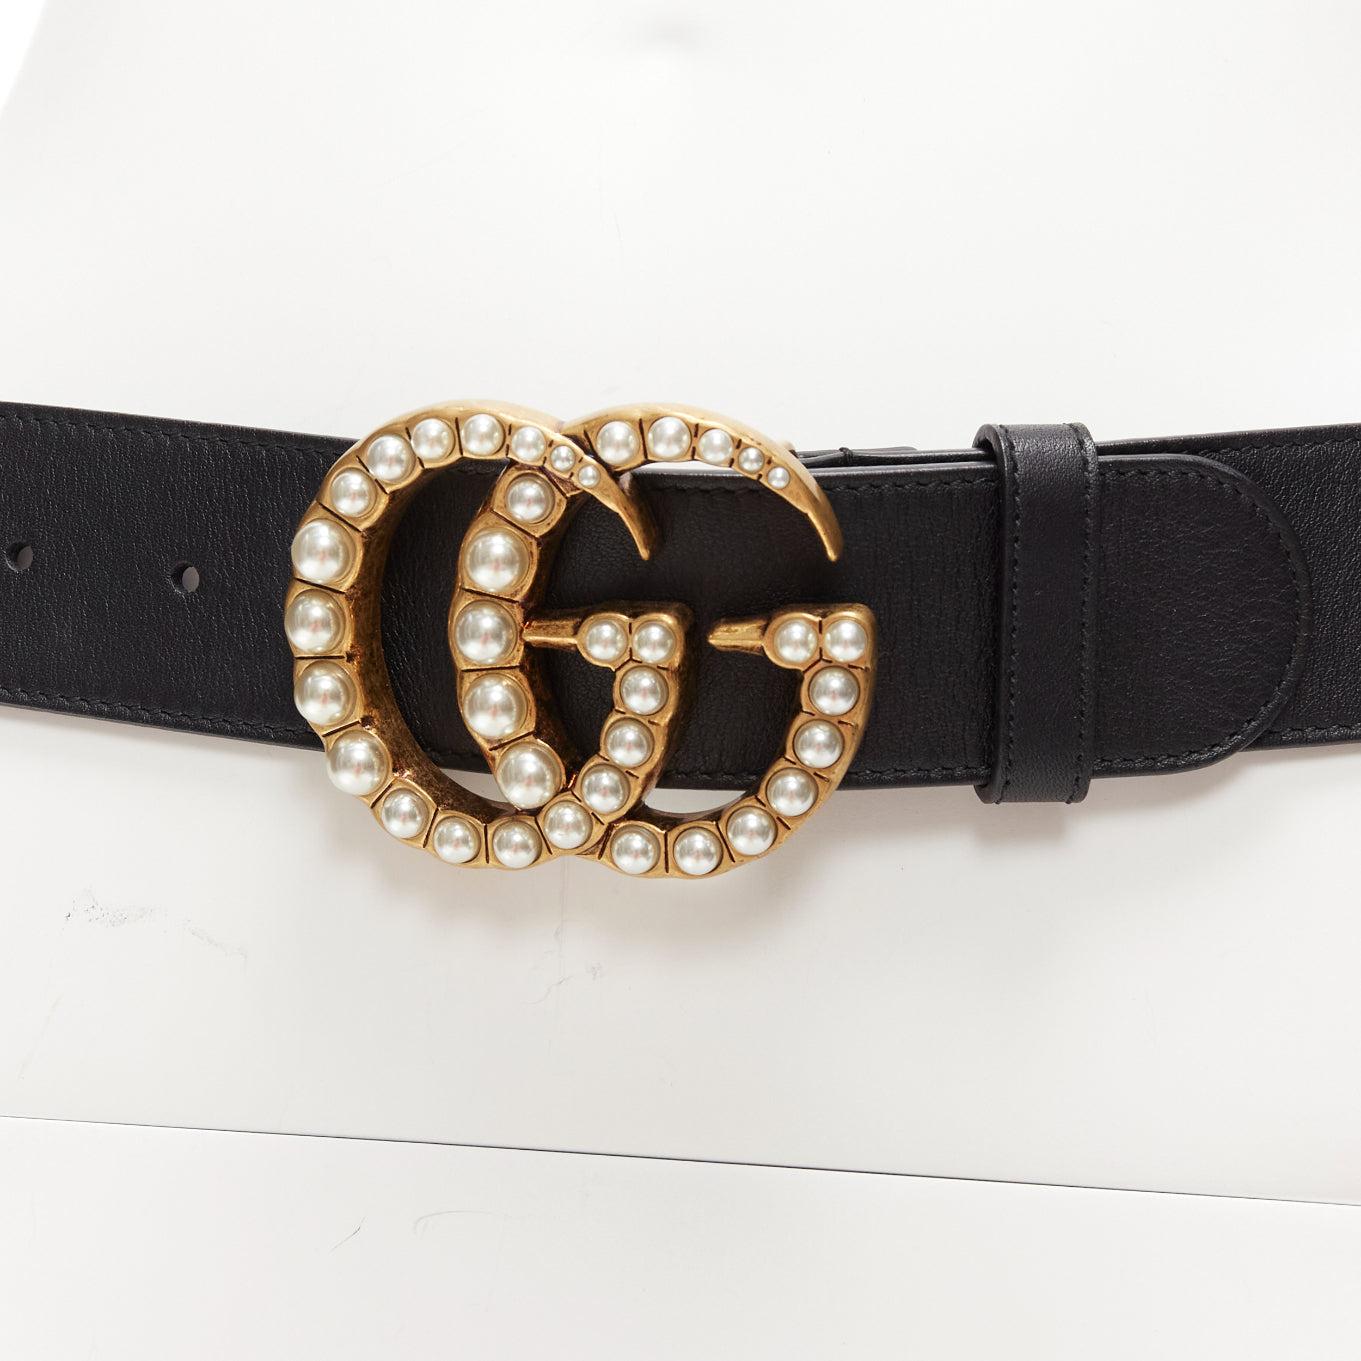 GUCCI Alessandro Michelel Double G gold pearl black leather belt 75cm
Reference: AAWC/A01201
Brand: Gucci
Designer: Alessandro Michele
Material: Leather, Metal
Color: Black, Pearl
Pattern: Solid
Closure: Belt
Lining: Black Leather
Made in: